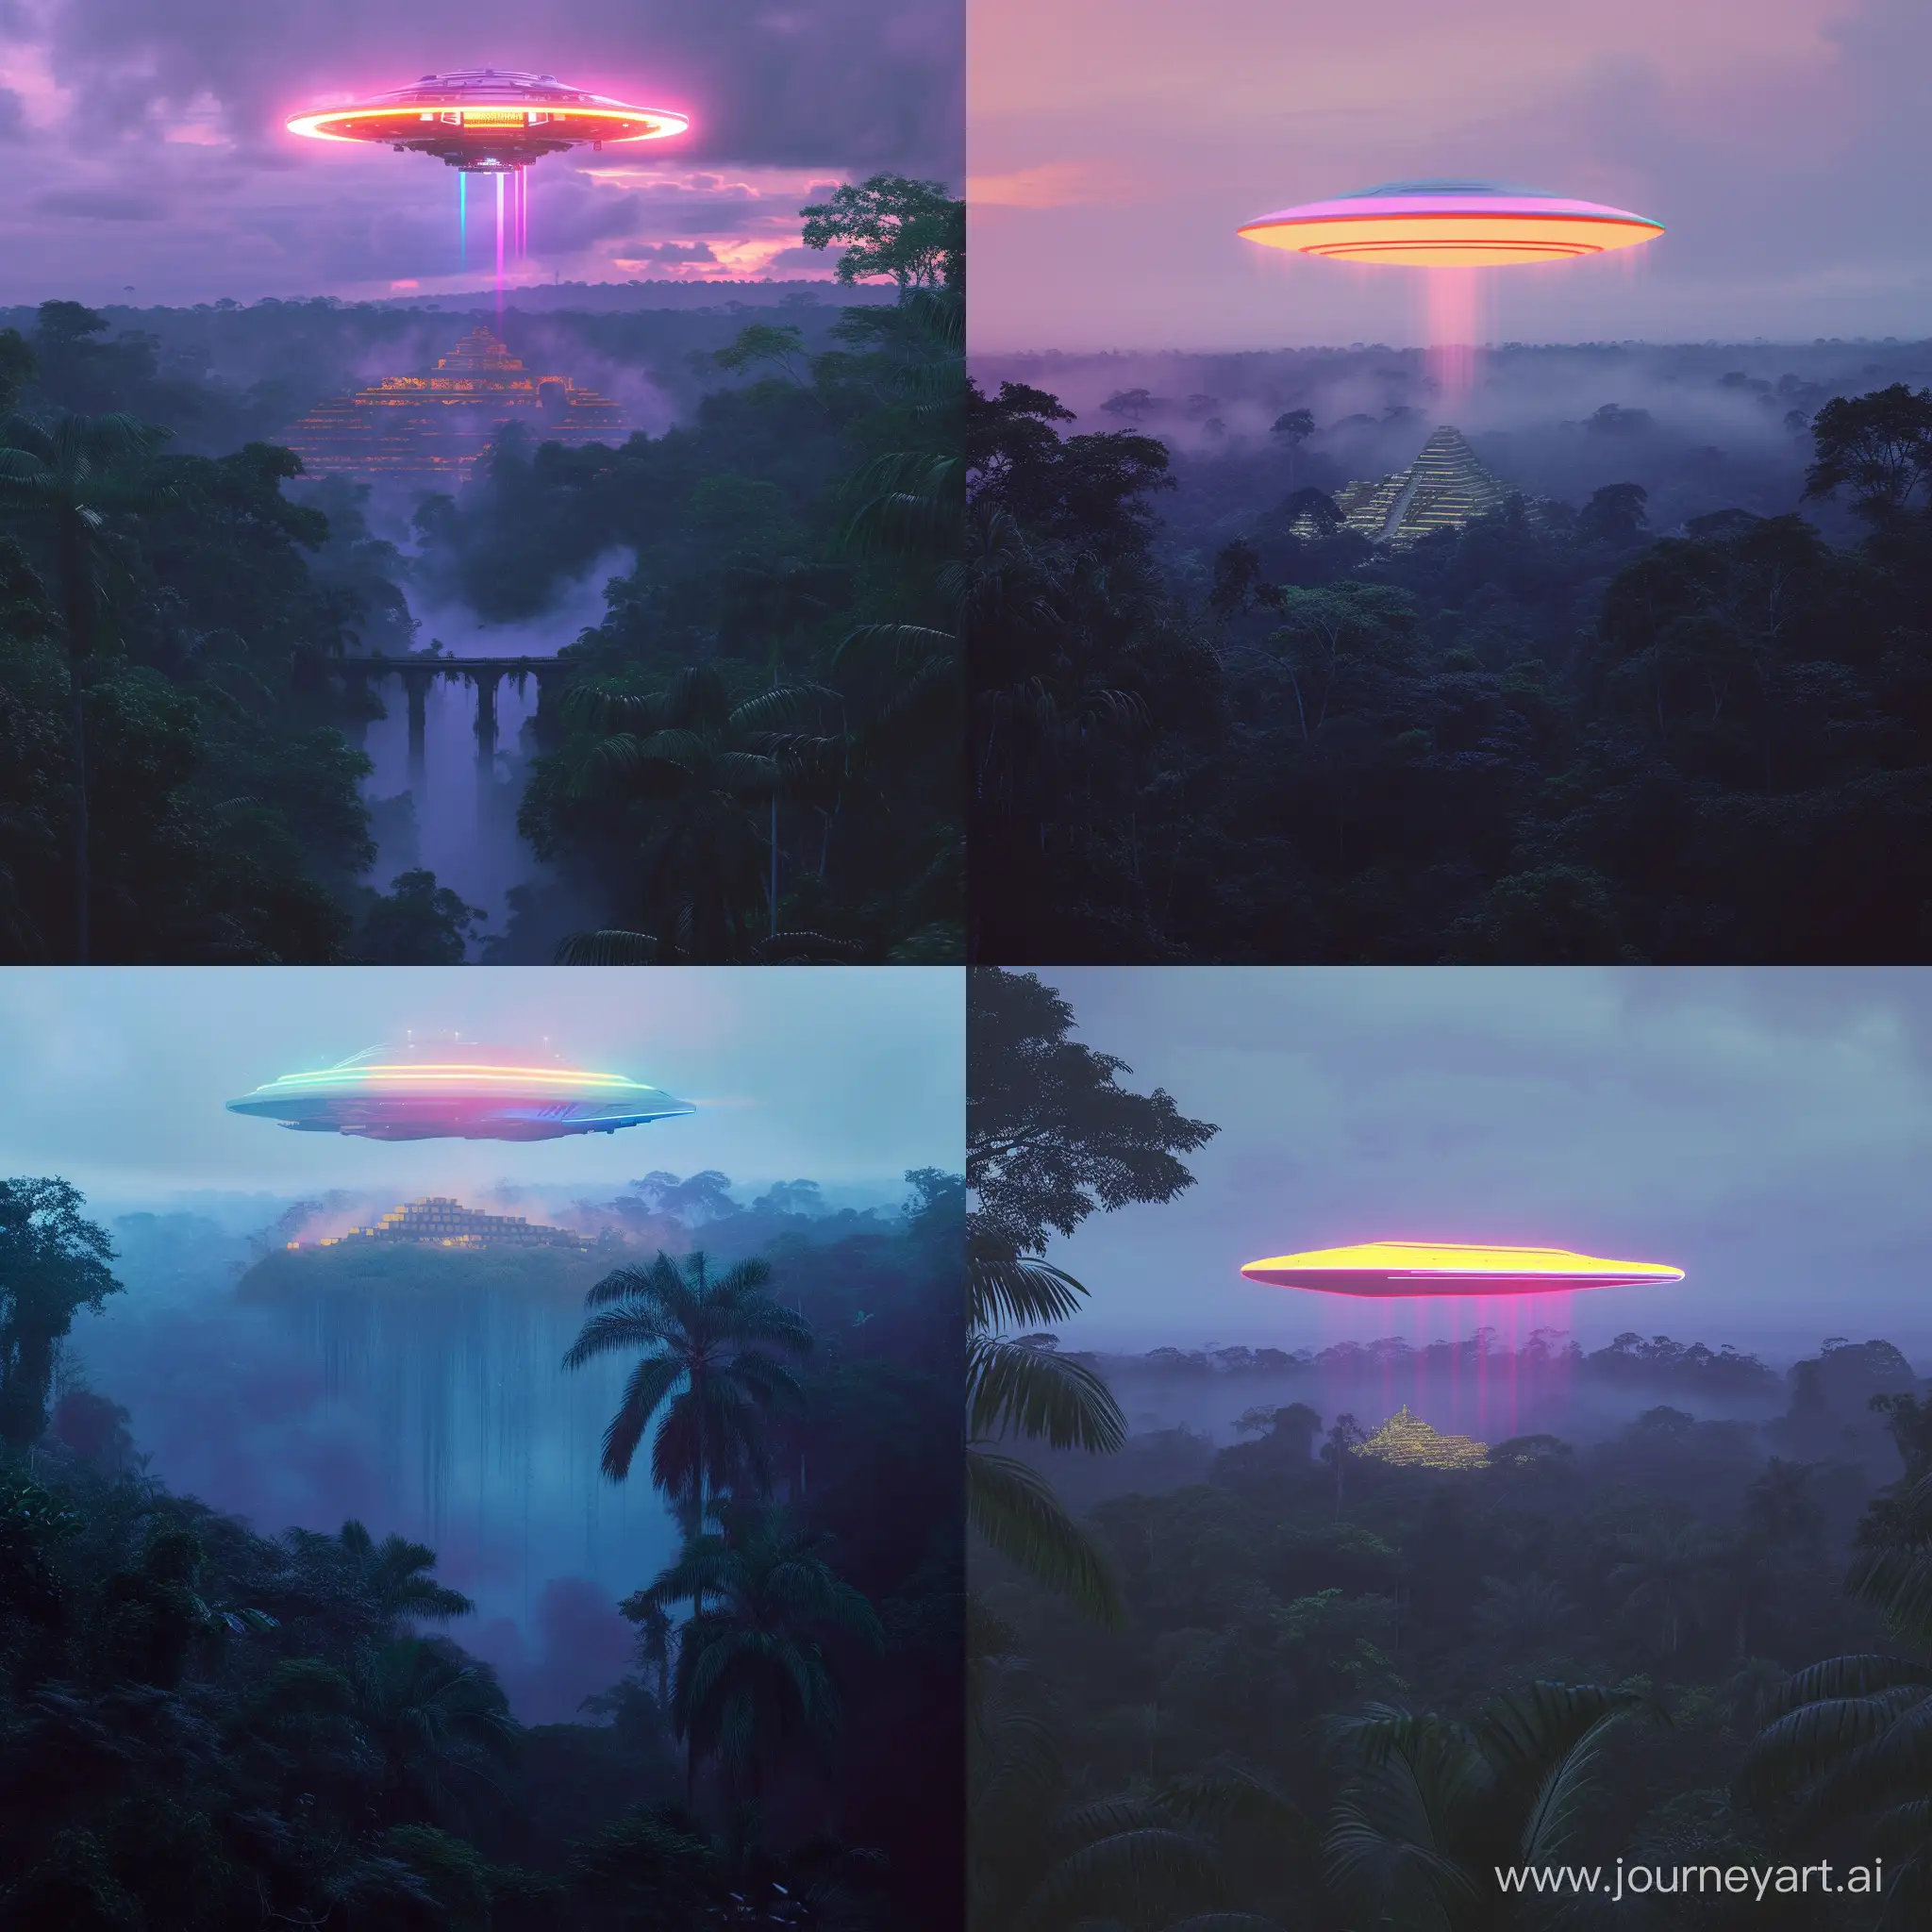 Surreal-Neon-Spaceship-Hovers-Over-Lost-City-of-Gold-in-Amazon-Jungle-at-Dusk